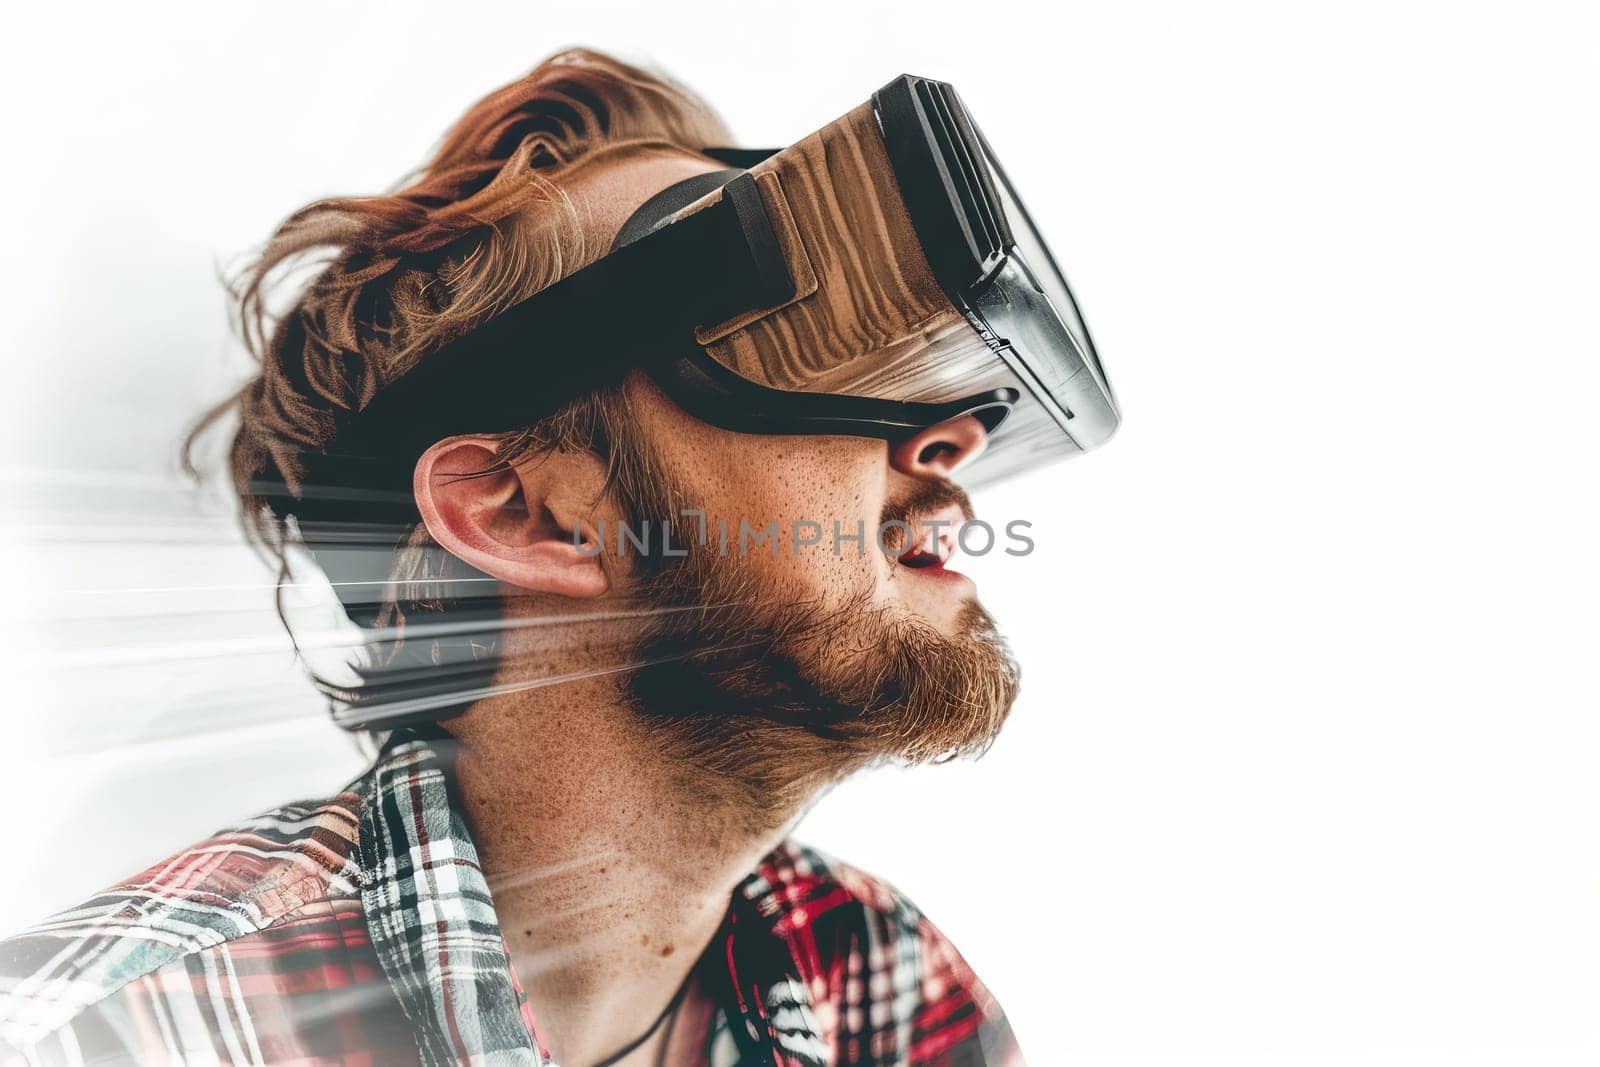 A man wearing a virtual reality headset. The man is wearing a red shirt and a plaid shirt